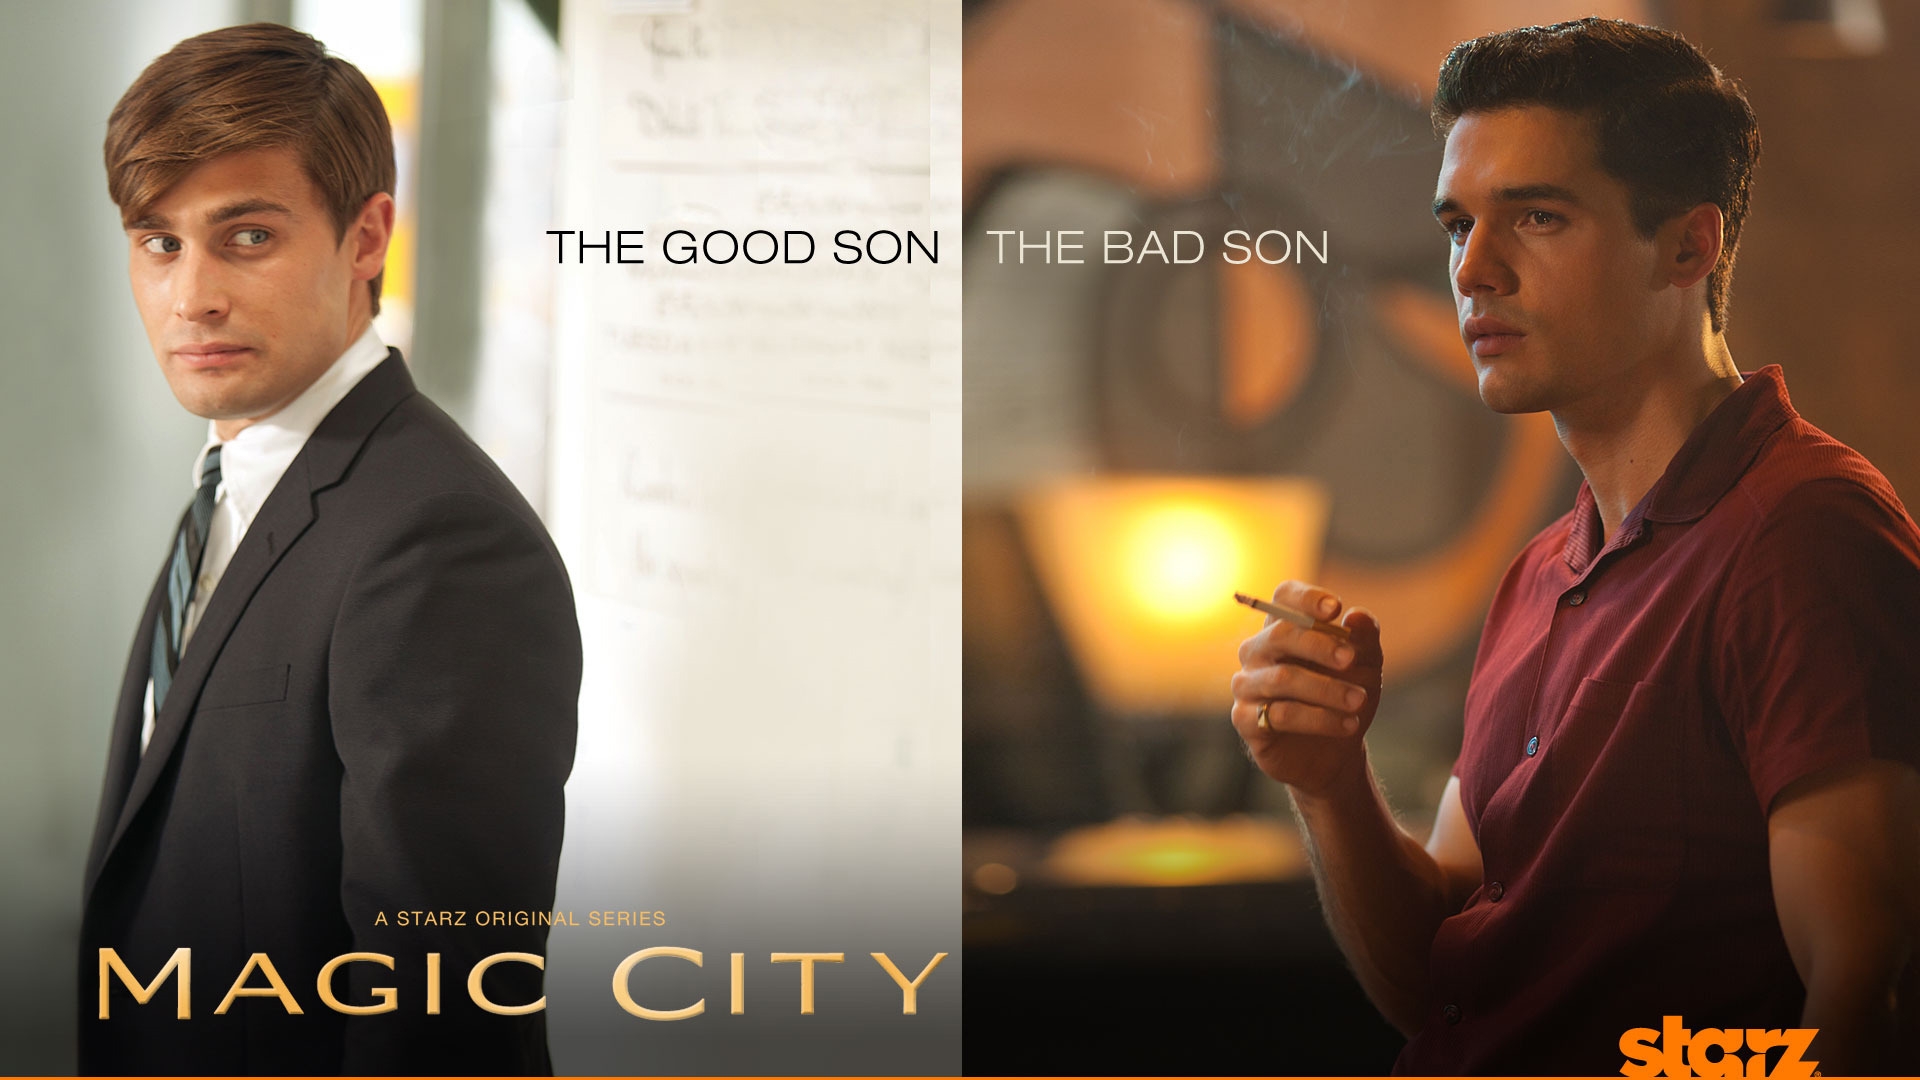 Magic City The Good Son and The Bad Son for 1920 x 1080 HDTV 1080p resolution